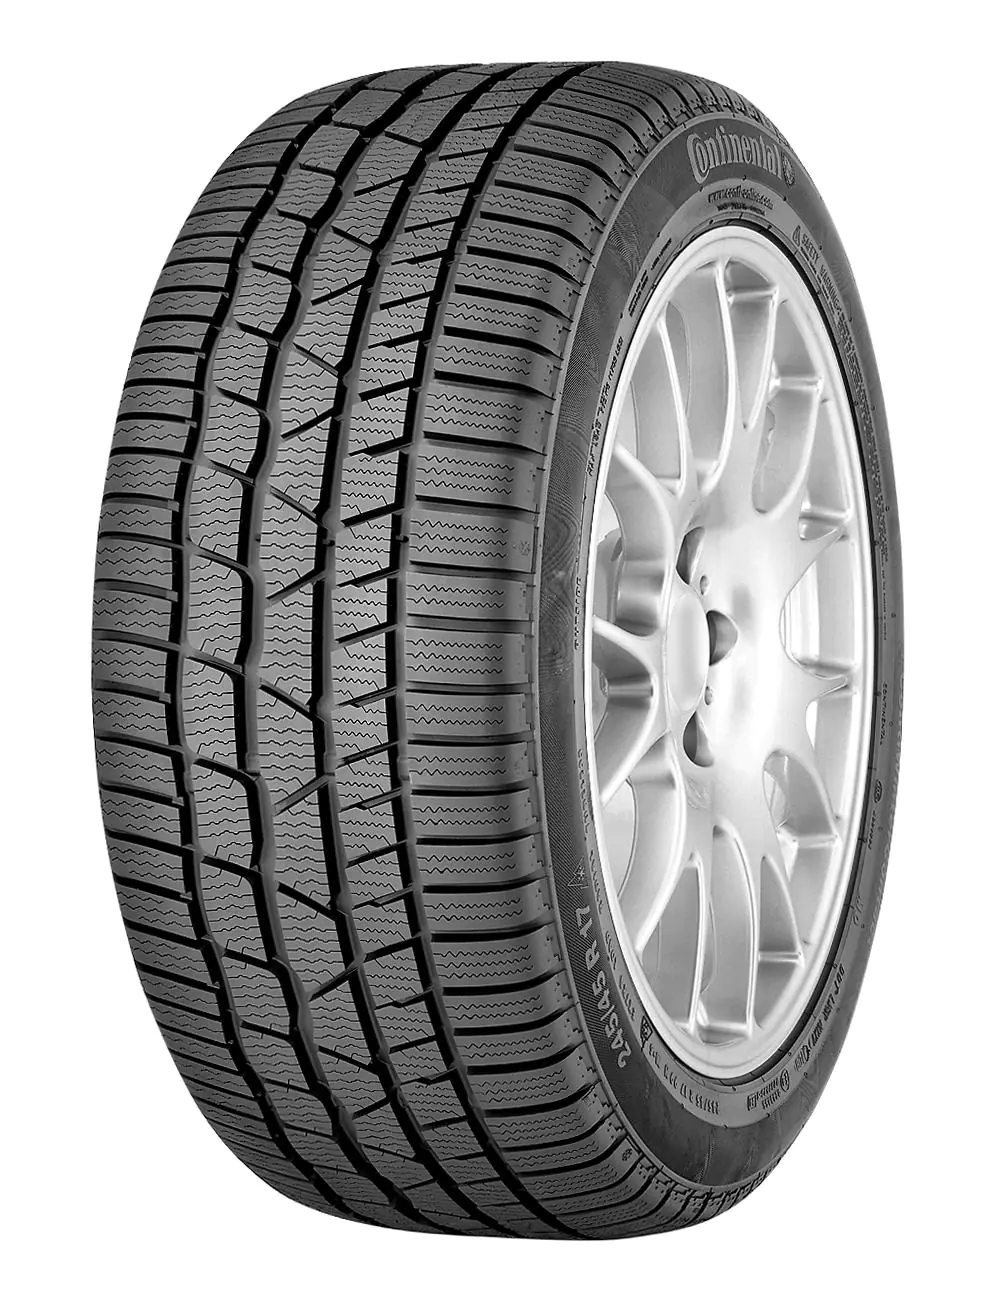 Gomme Autovettura Continental 285/40 R19 103V WINTERCONT TS830P N0 FR M+S Invernale